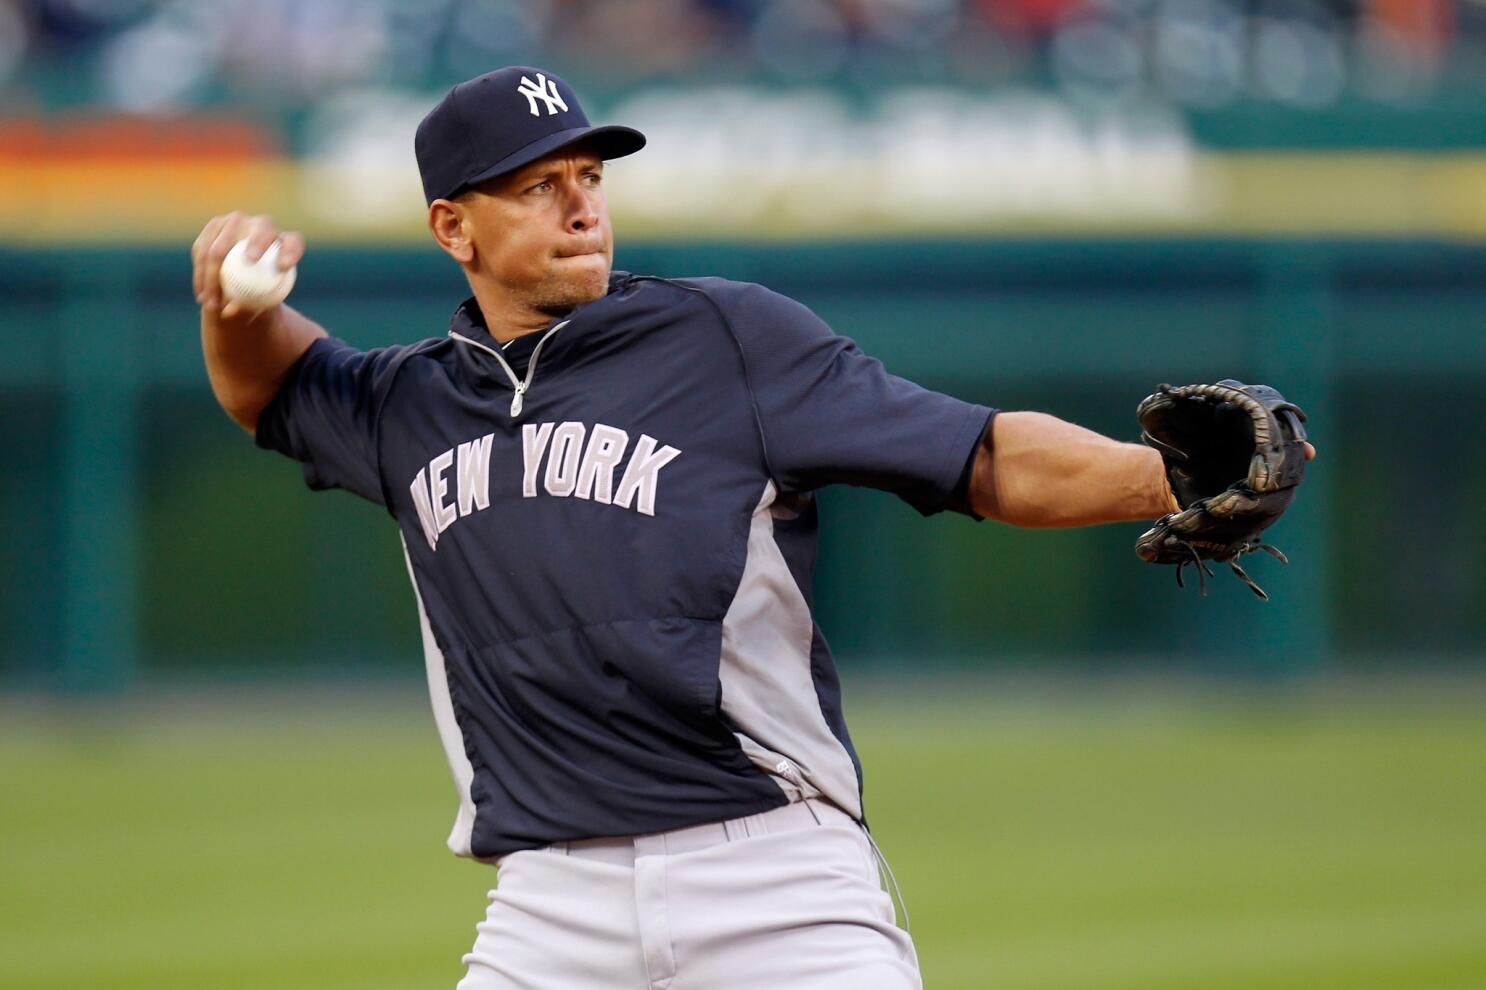 Alex Rodriguez 'disappointed' he will not play in All-Star Game